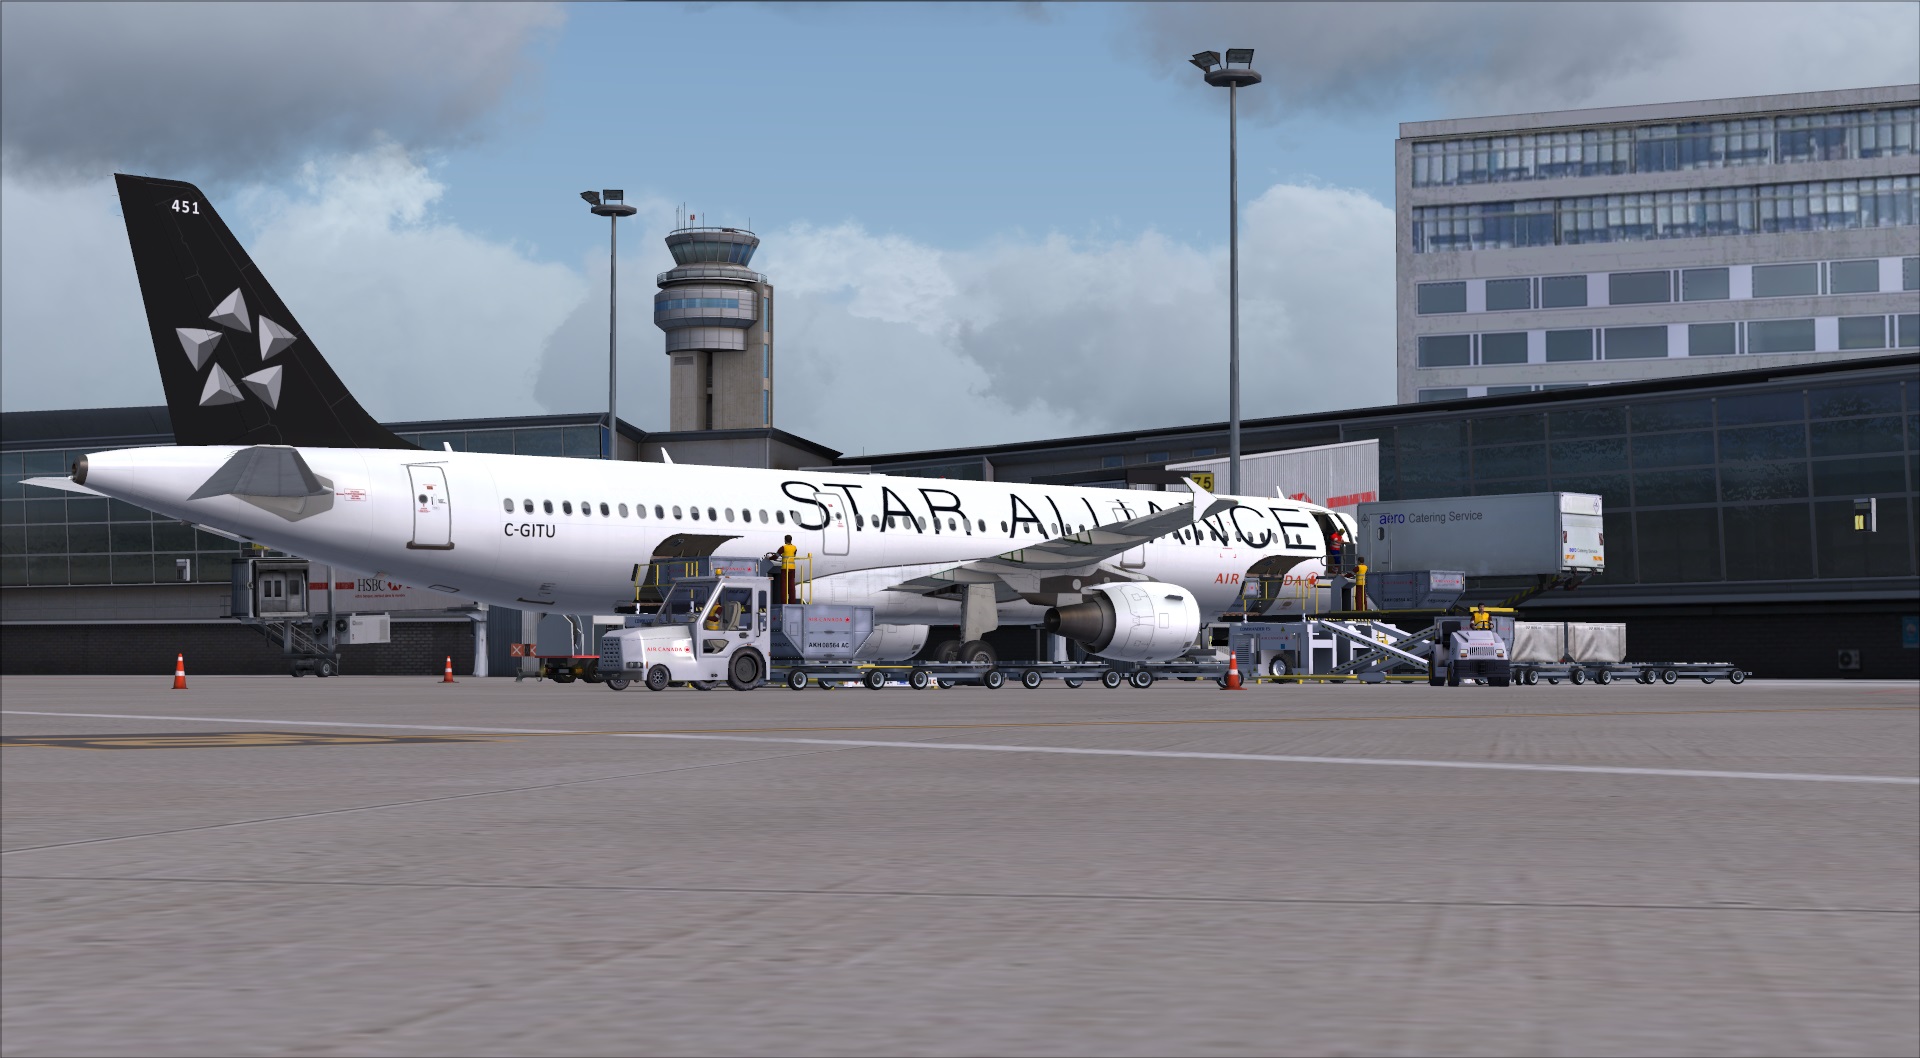 More information about "Air Canada A321 Star Alliance"